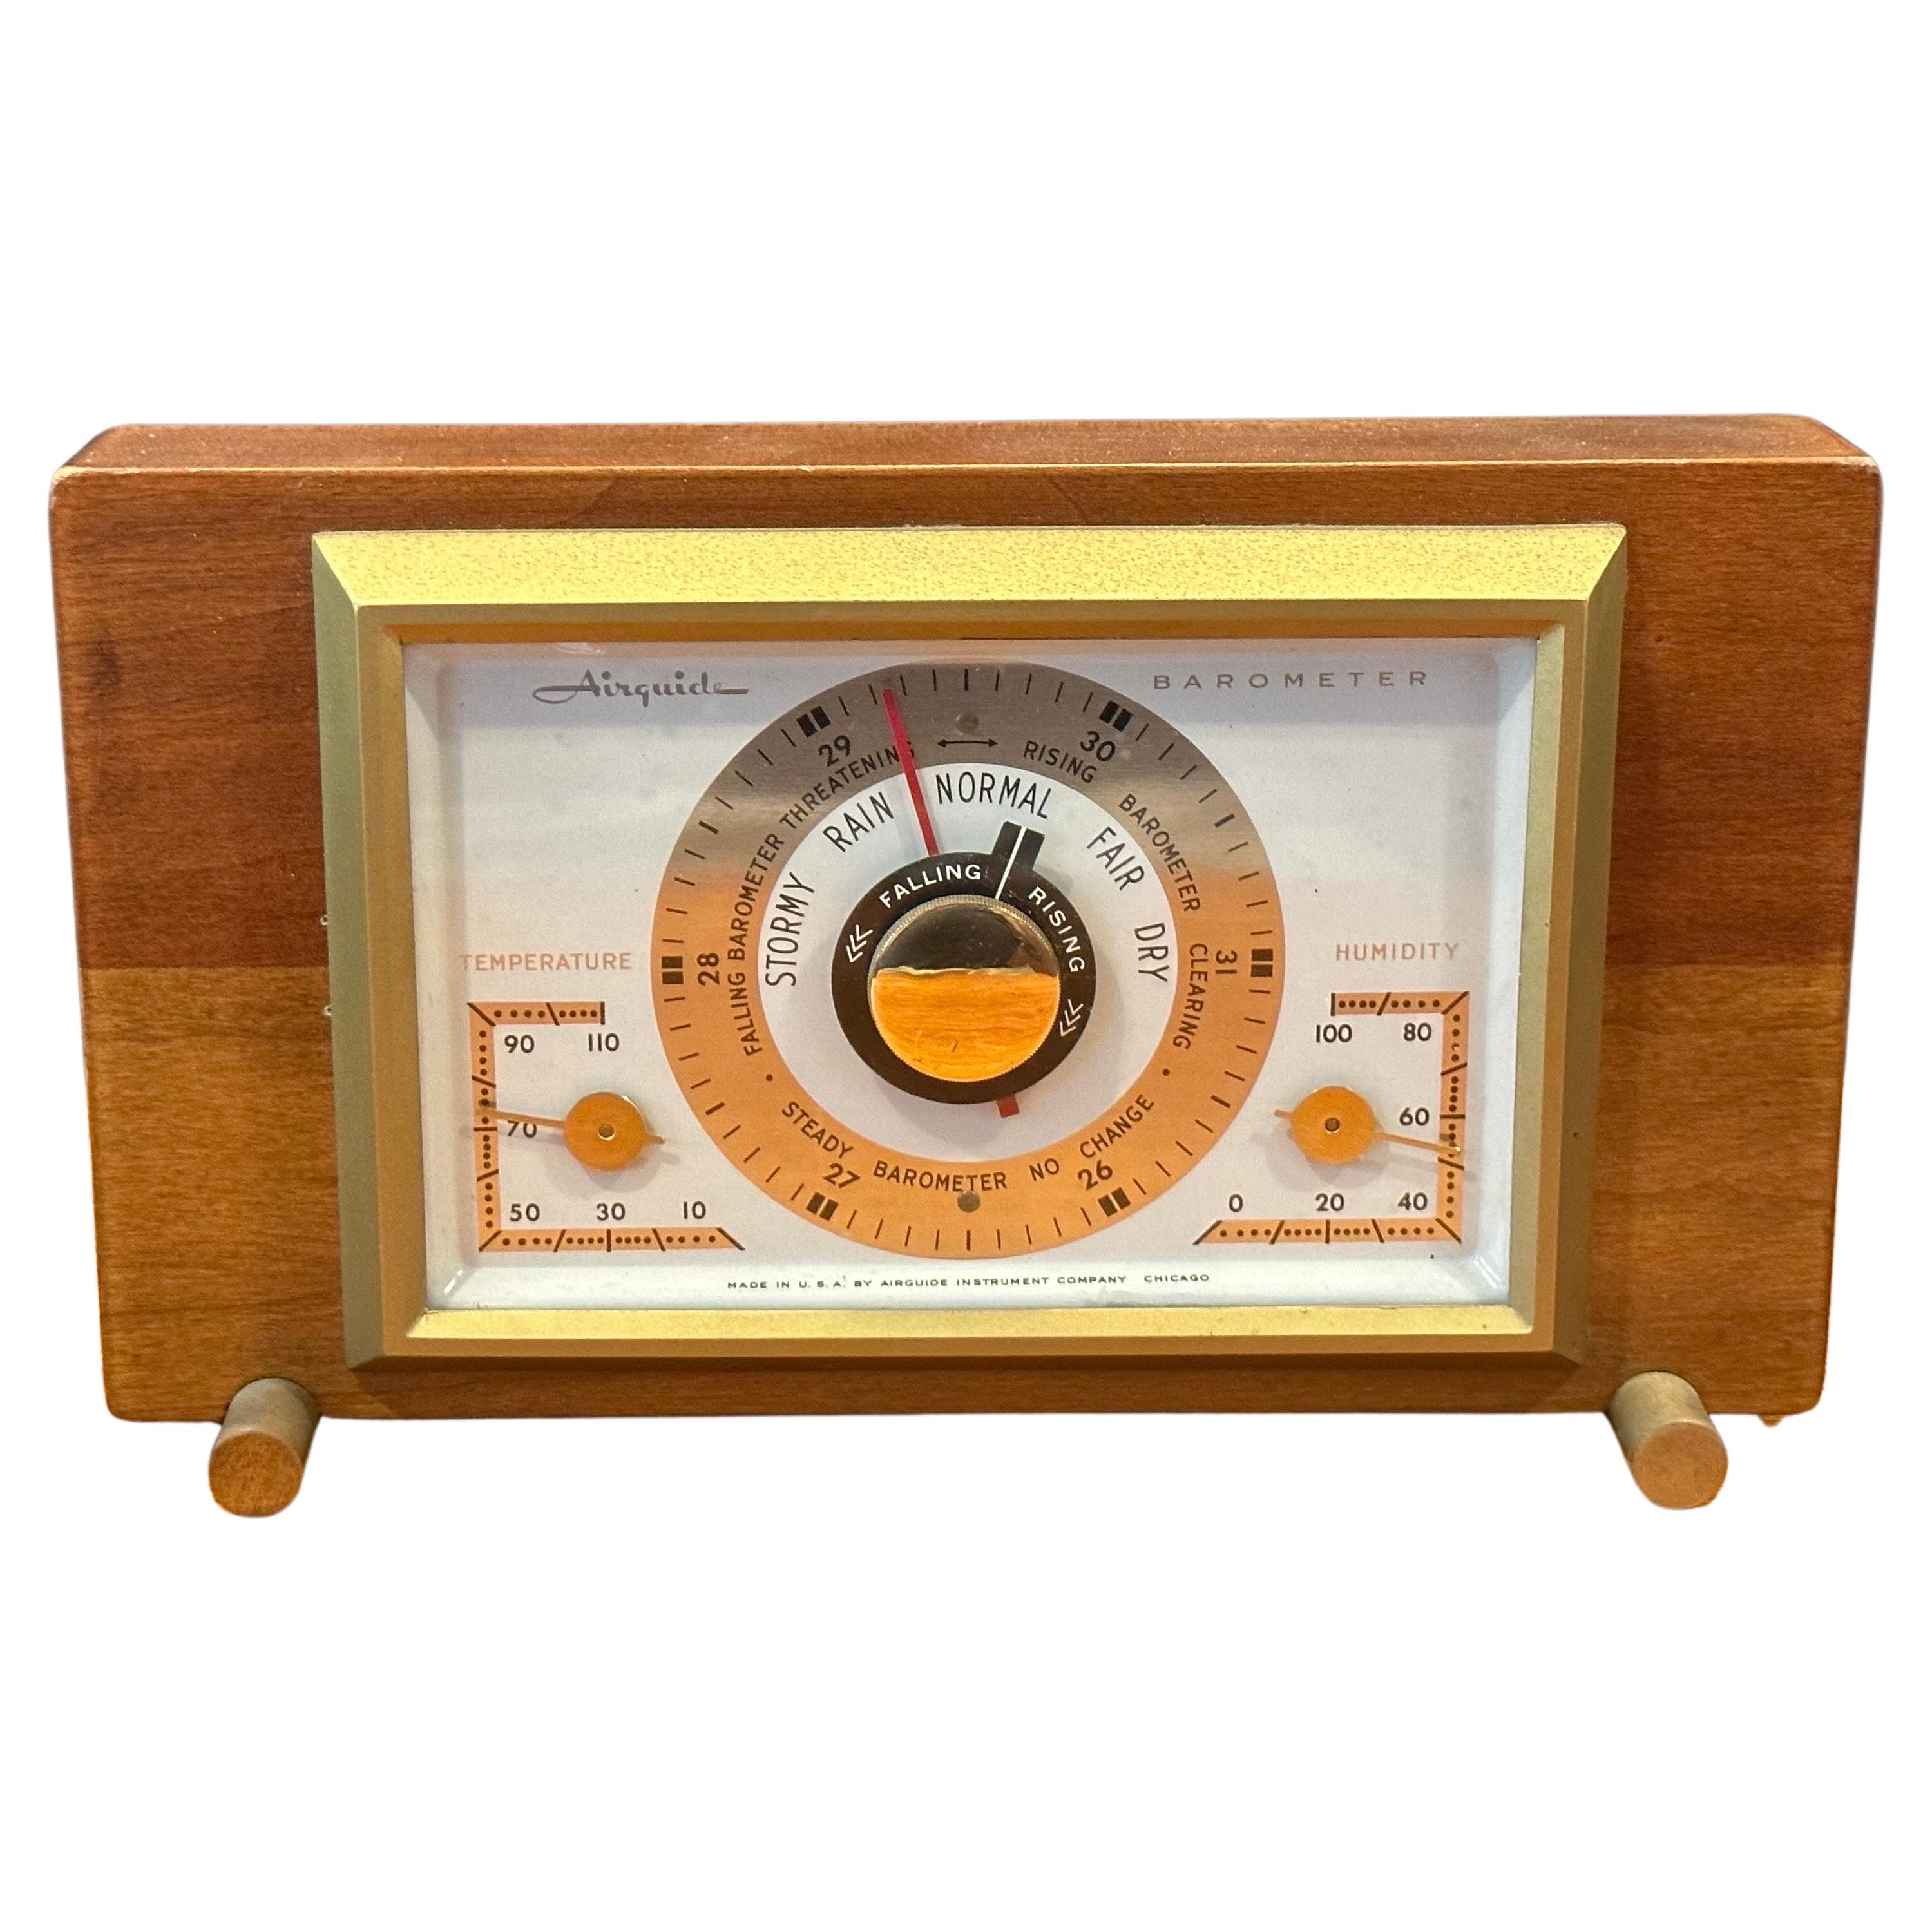 Desktop Barometer / Weather Station by Airguide Instrument Company For Sale